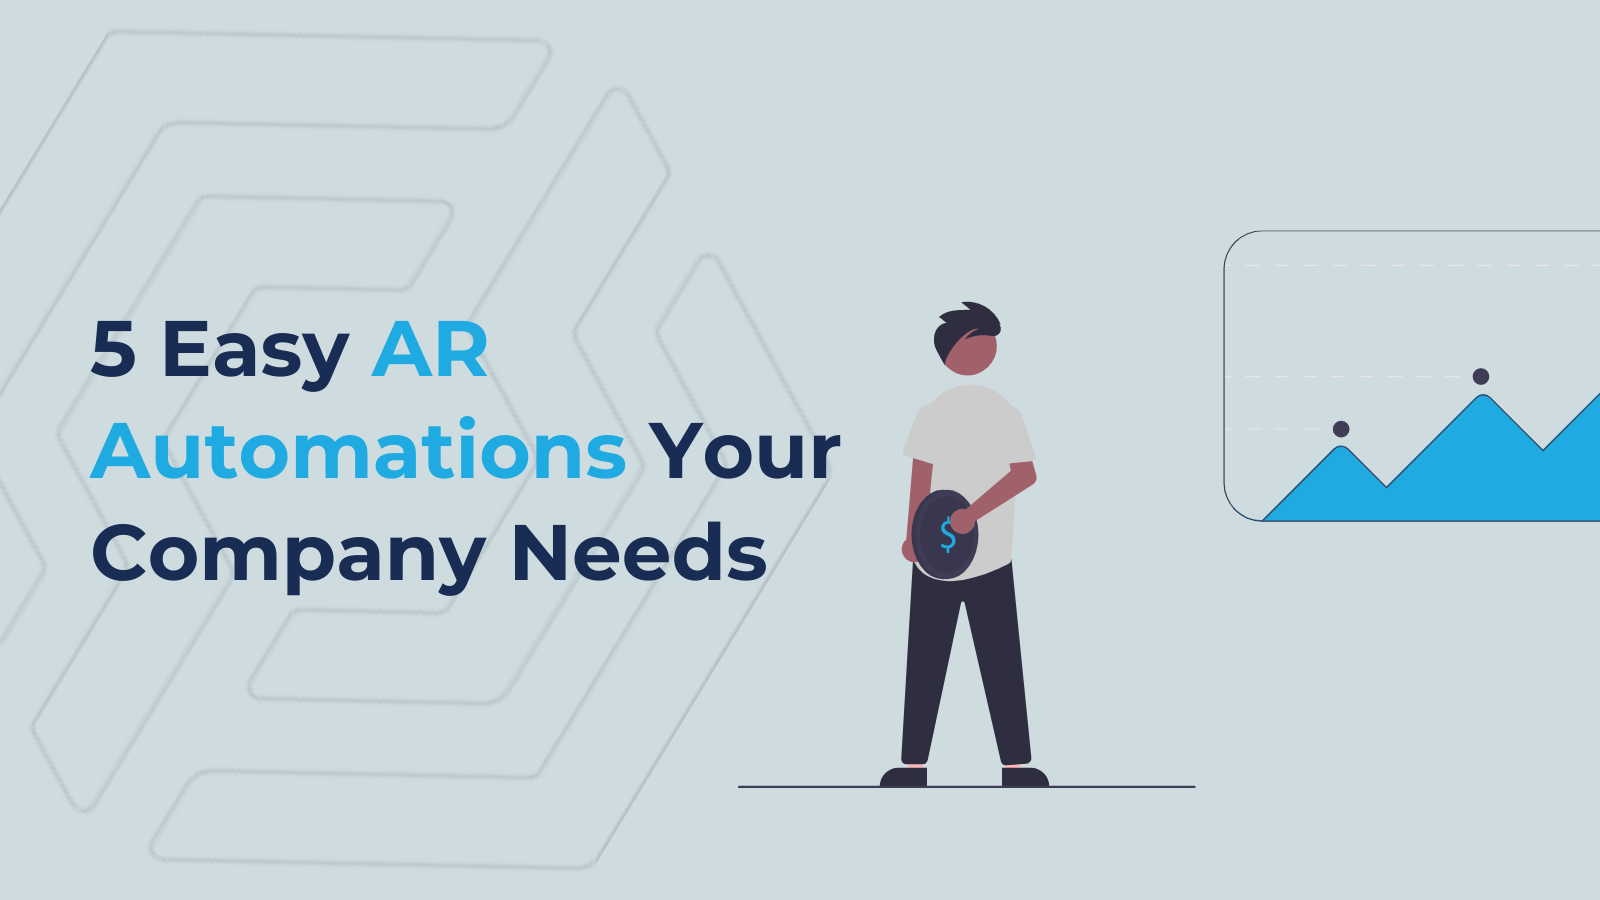 5 Easy AR Automations Your Company Needs